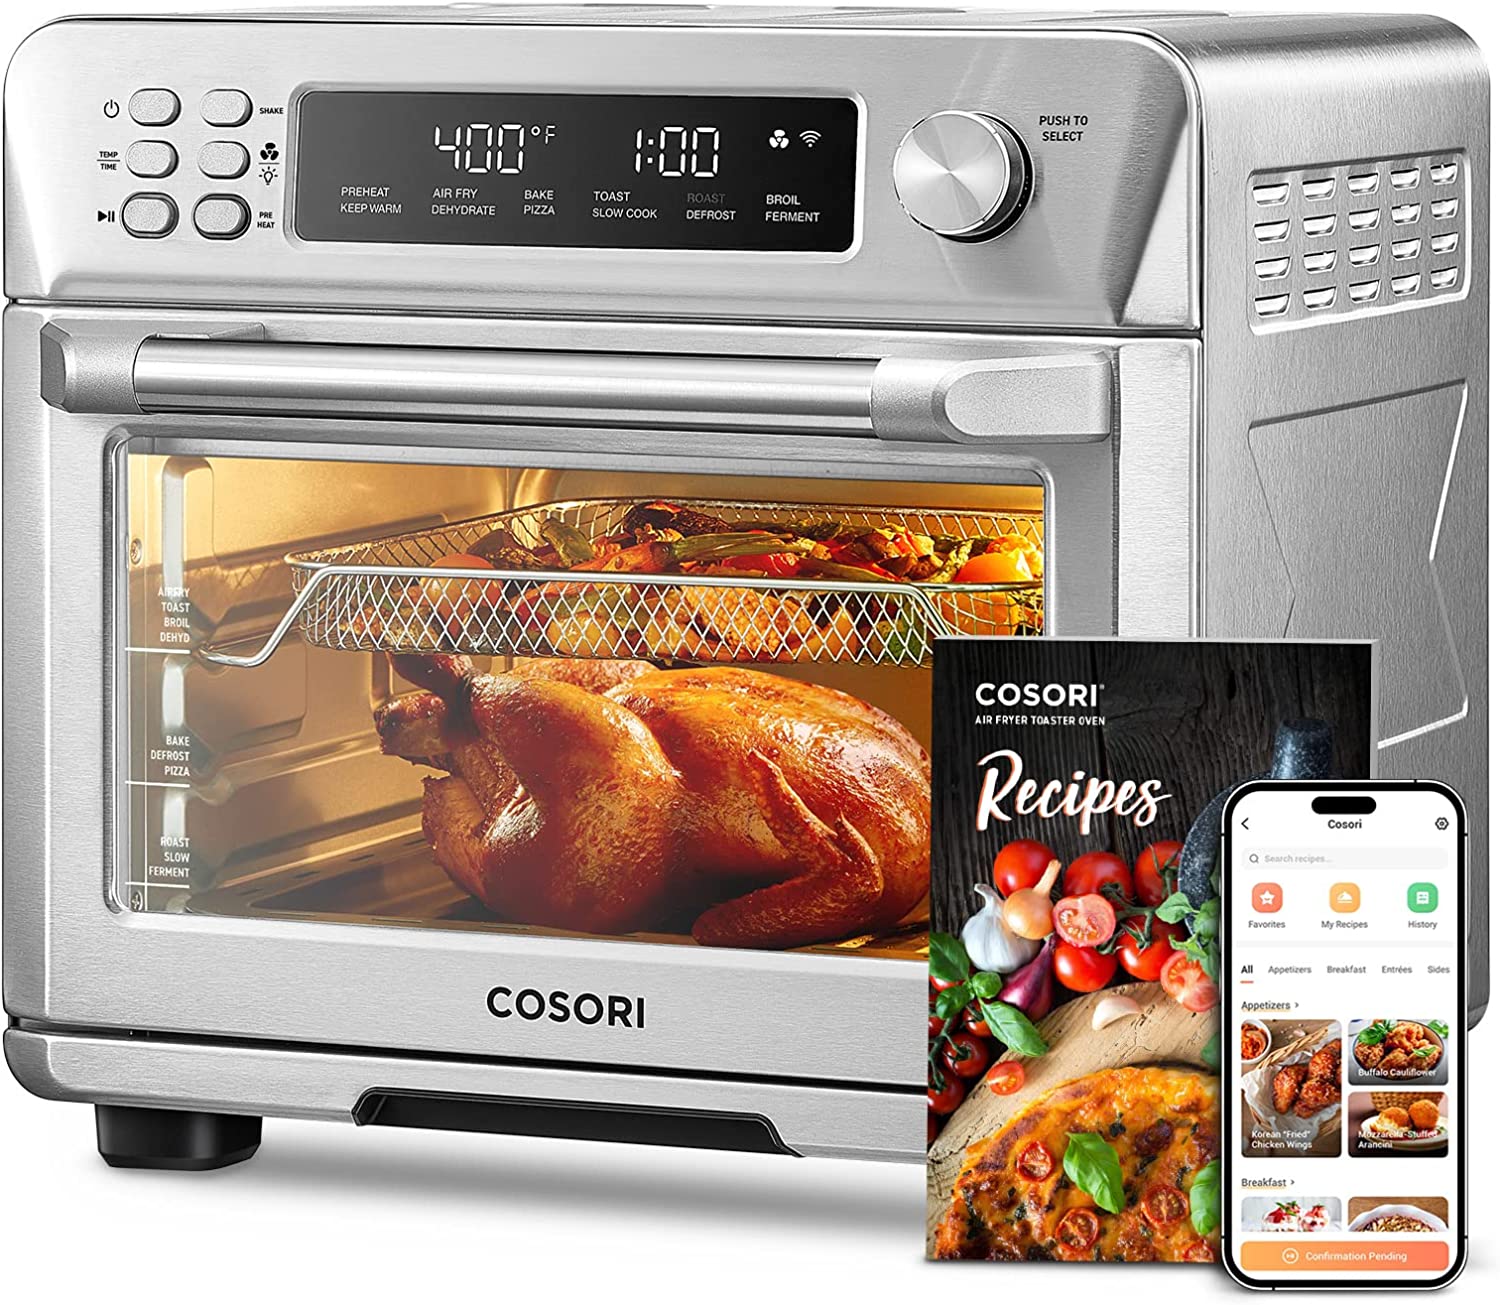 Mejores ofertas e historial de precios de 𝓞𝓘𝓜𝓘𝓢 Air Fryer Toaster Oven,  32QT Large 21 in 1 Smart Convection oven Countertop, with Rotisserie and  Dehydrator,1800W in Stainless Steel, Silver en